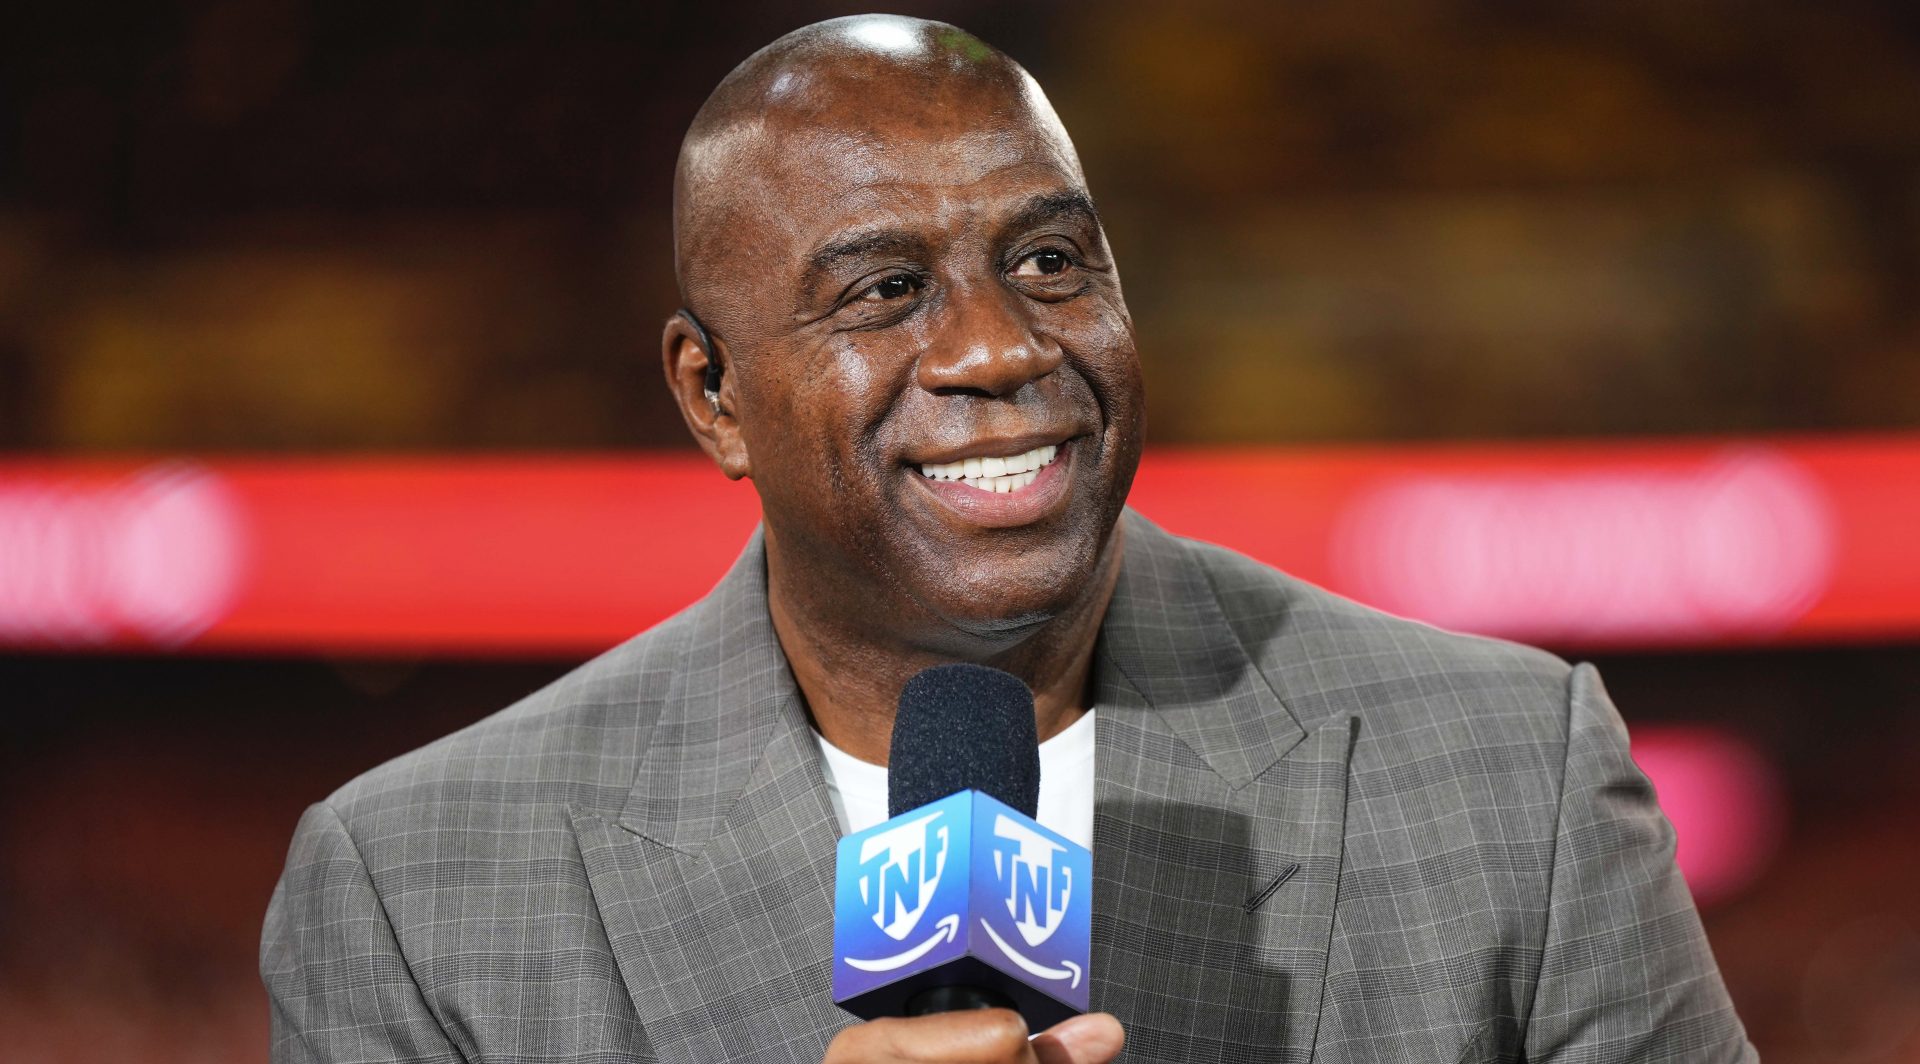 Still Ballin Forbes Officially Acknowledges Magic Johnson As A Billionaire scaled